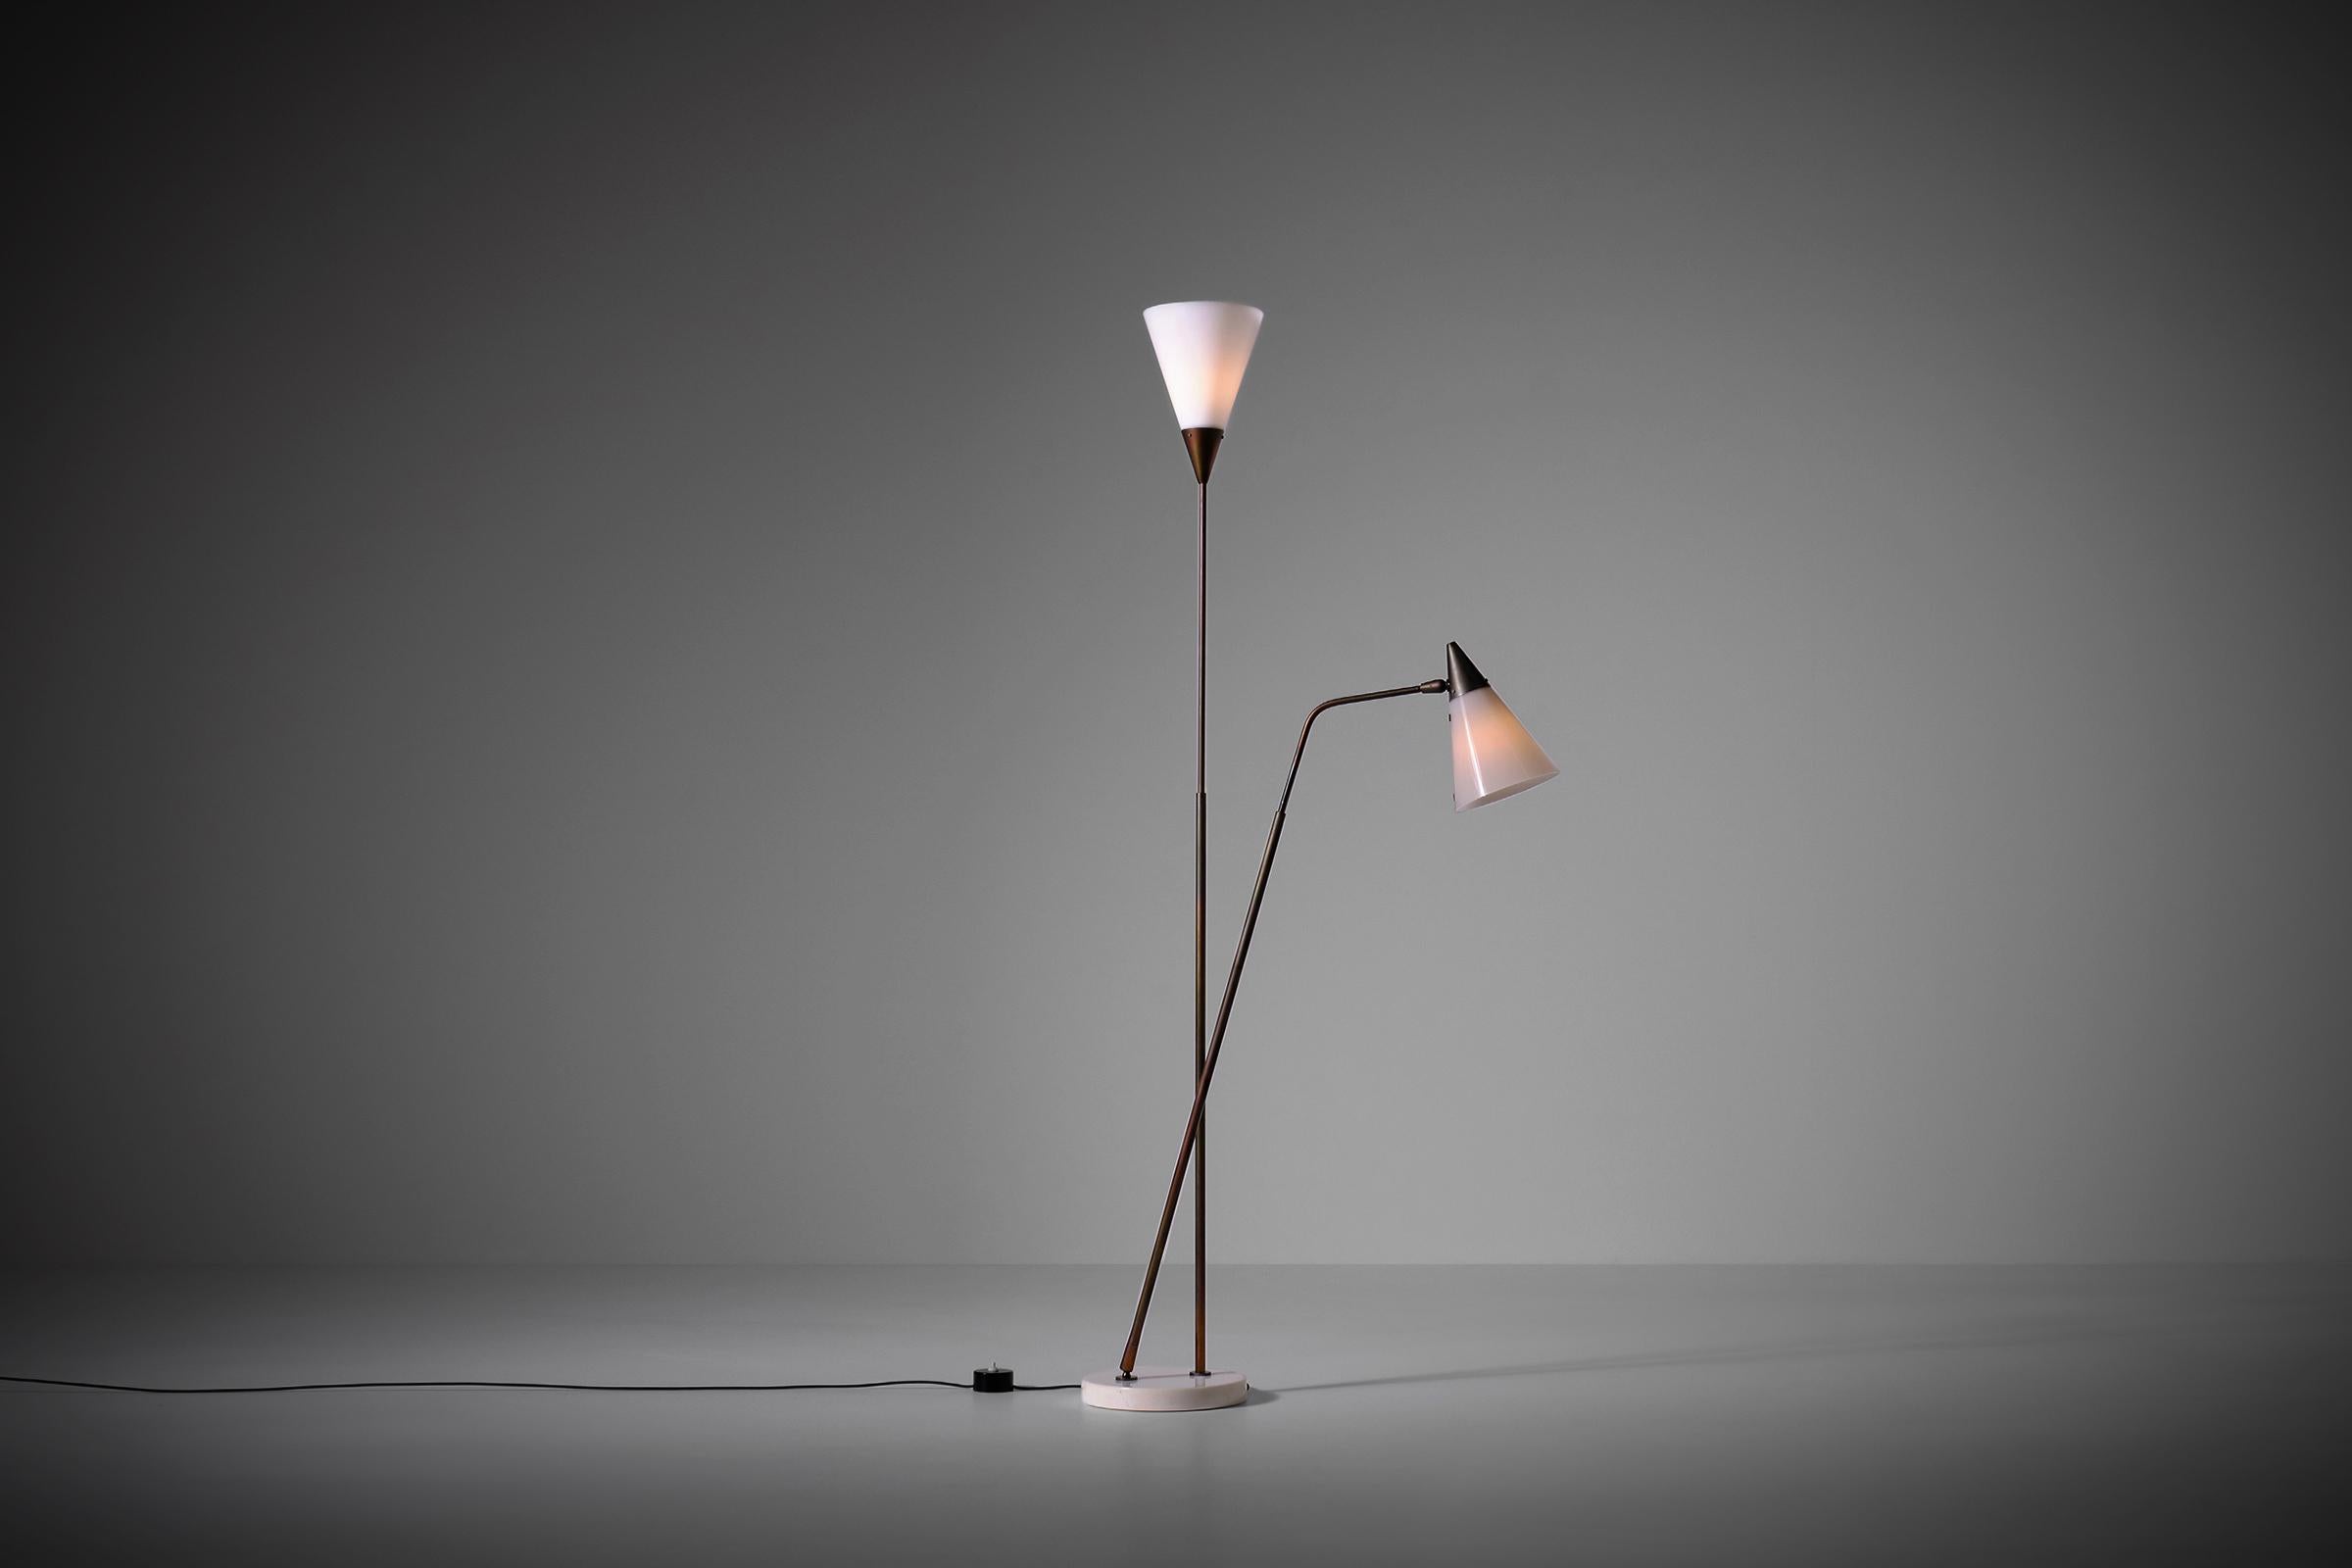 Rare adjustable floor lamp mod. 339-2 PX by Giuseppe Ostuni for O-Luce, Italy 1952. Unusual model with duo colored perspex shades; one in opal white and one in warm grey. Very intelligent design with inventive technical details such as the